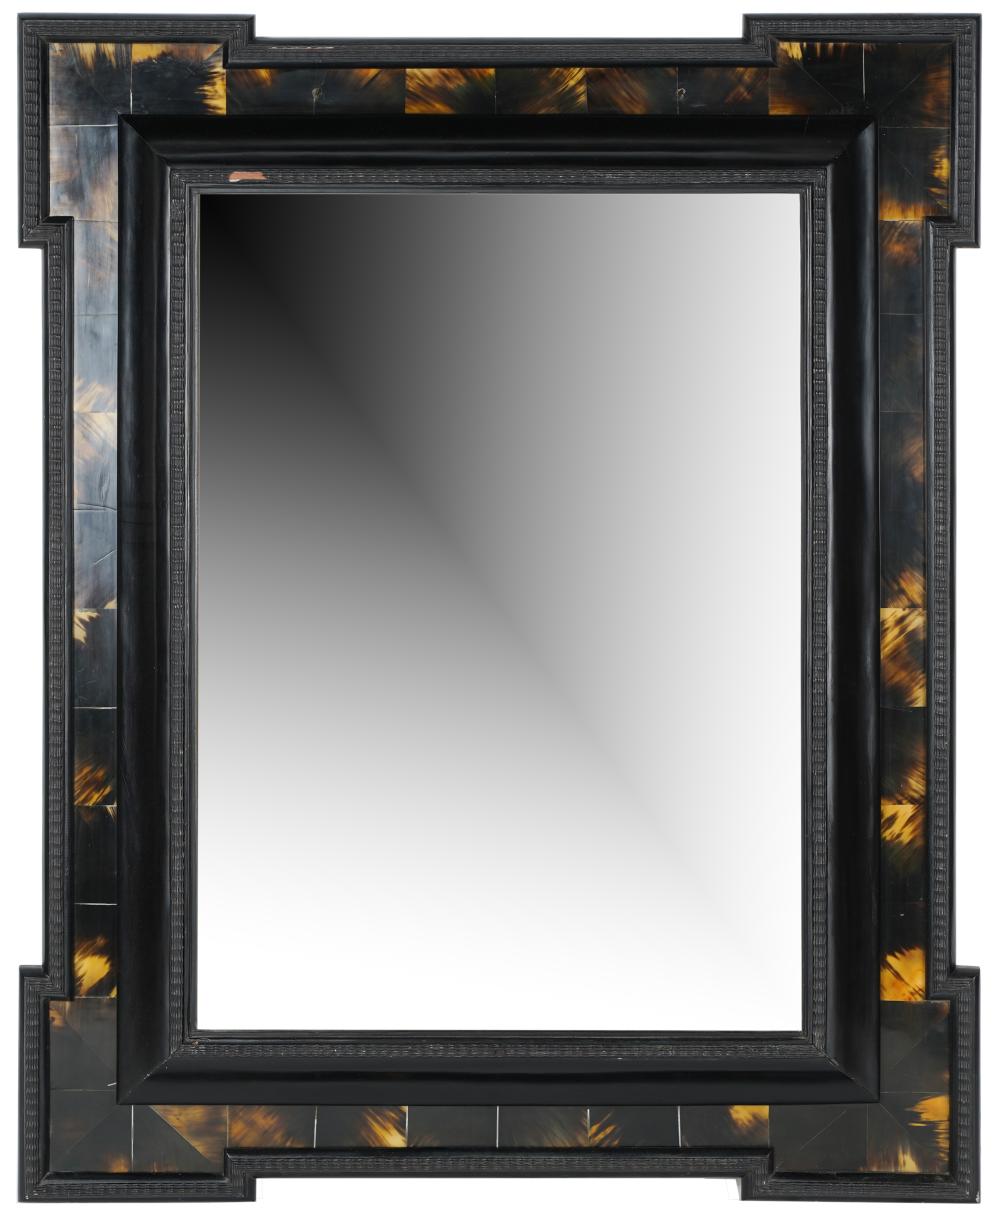 FLEMISH BAROQUE STYLE WALL MIRRORwith 324d5c